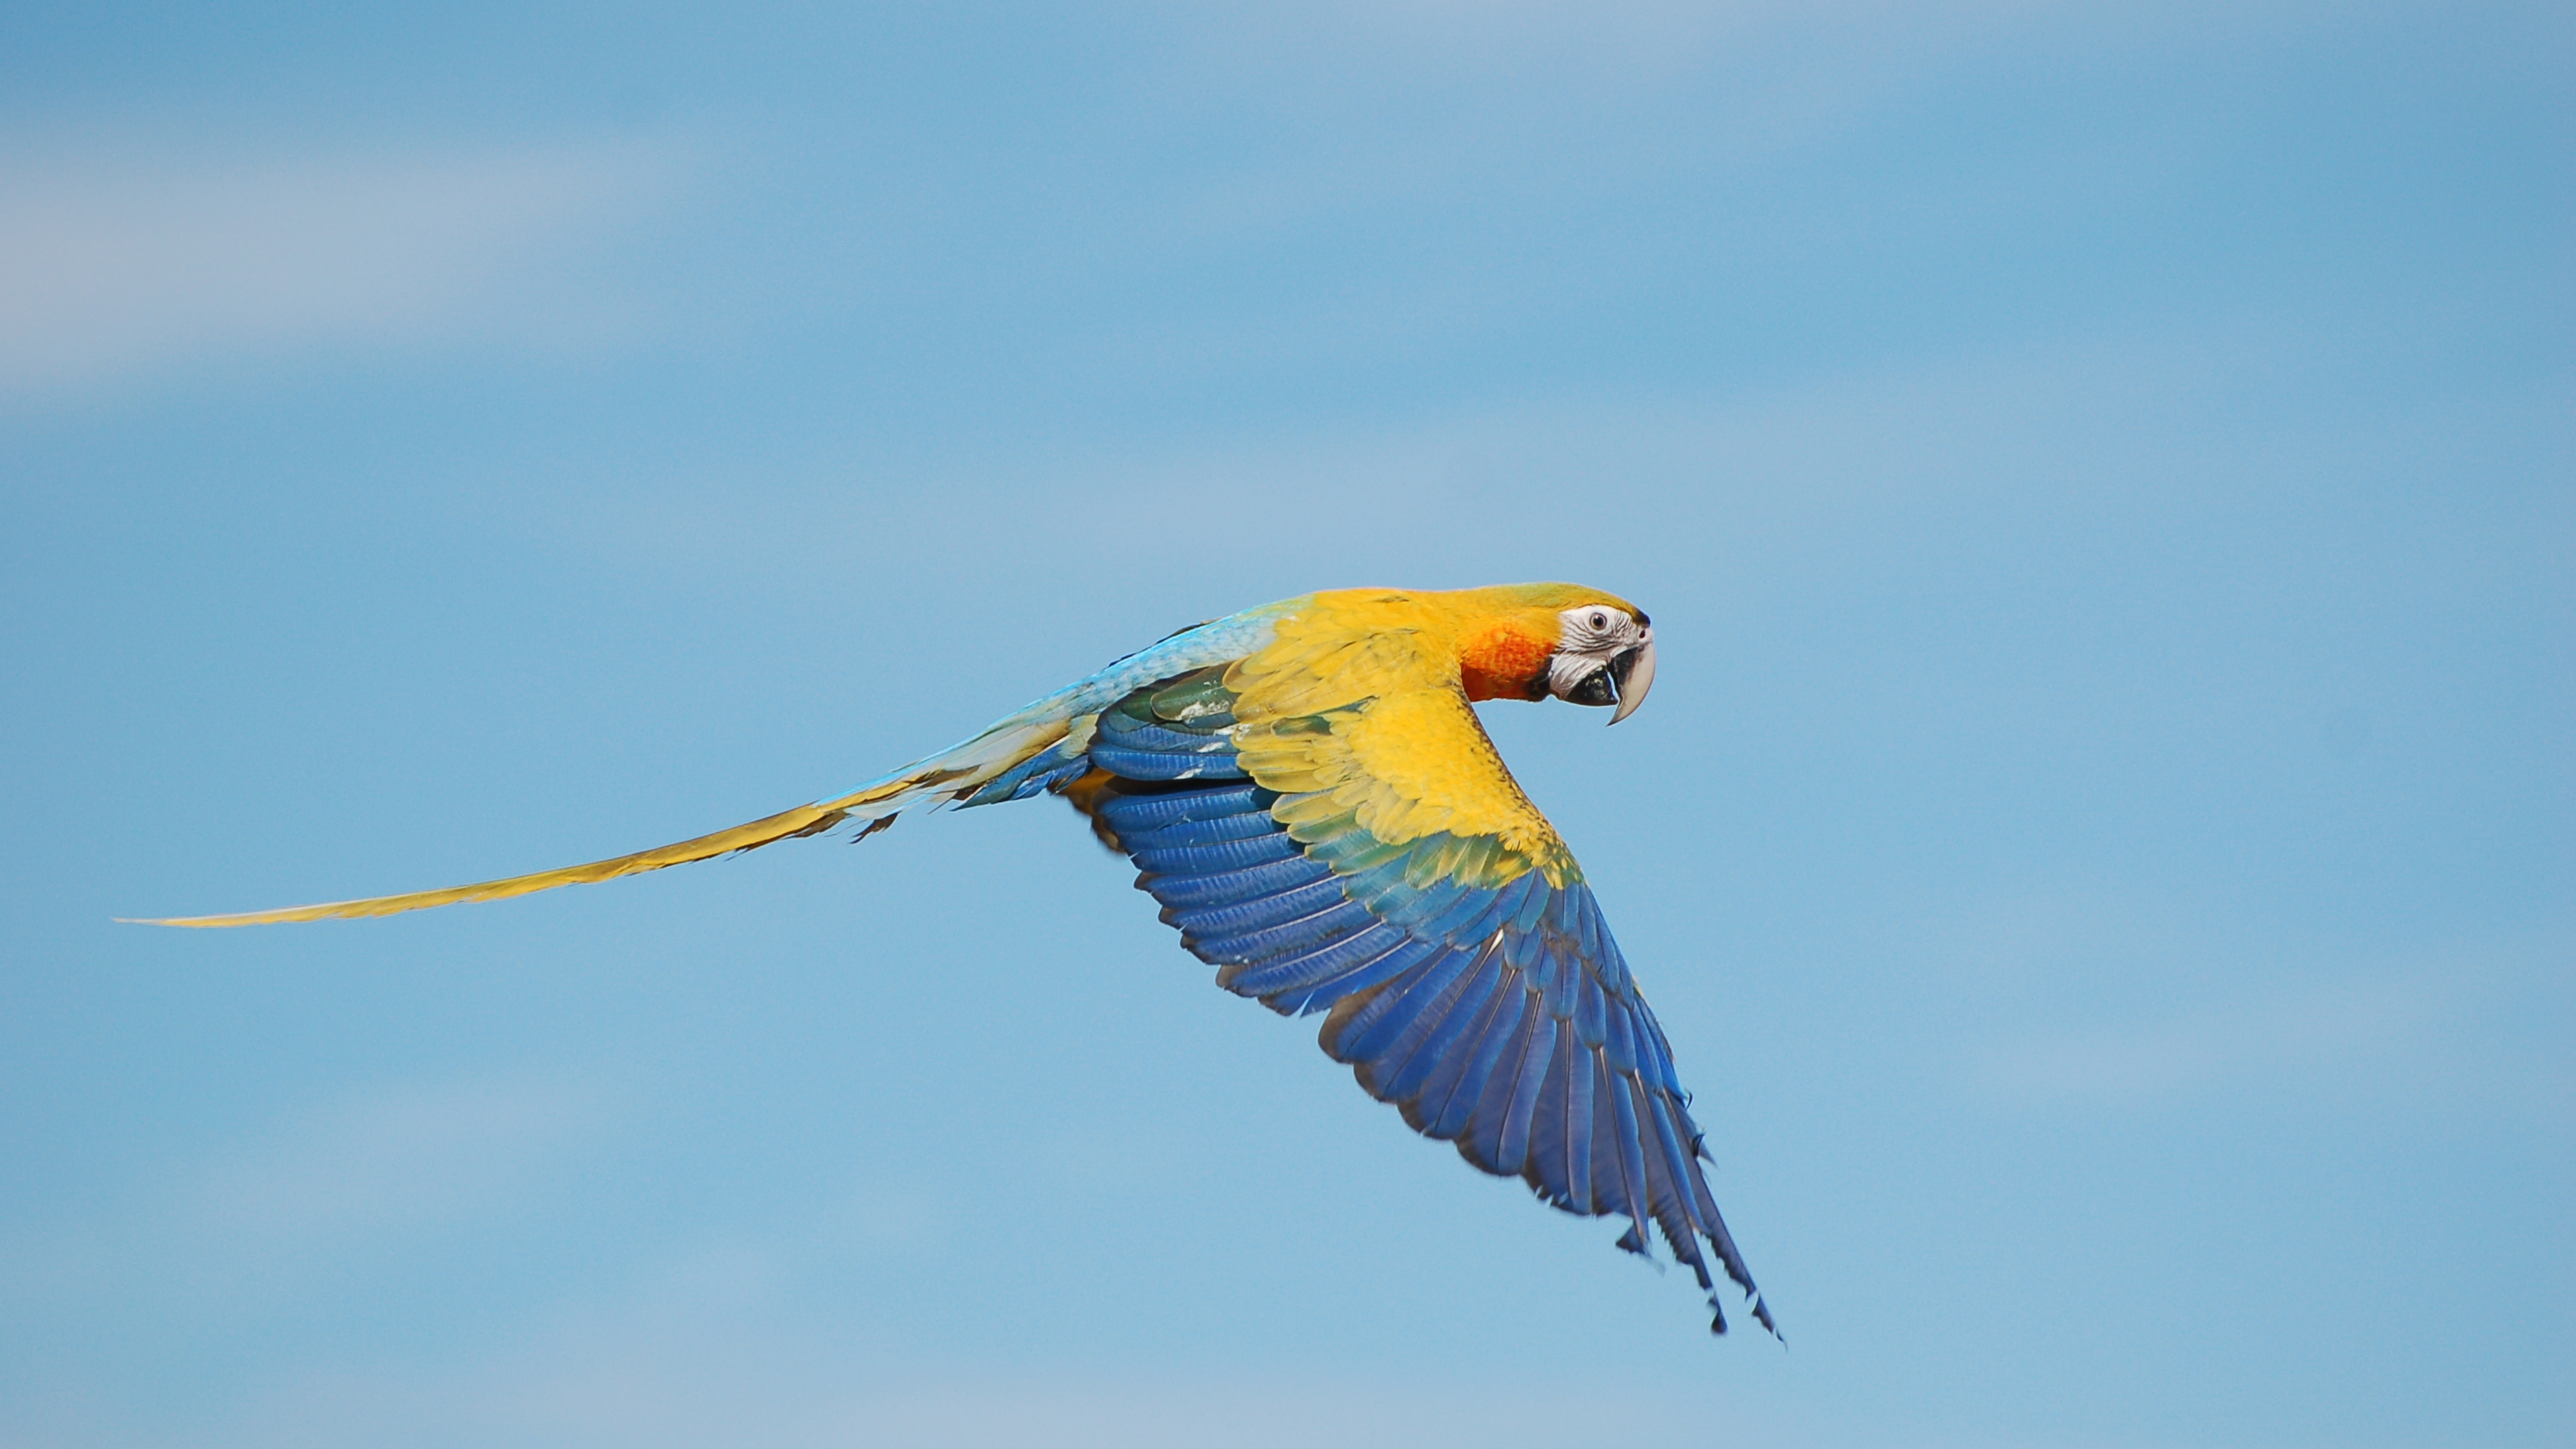 General 3840x2160 birds parrot animals closeup simple background flying